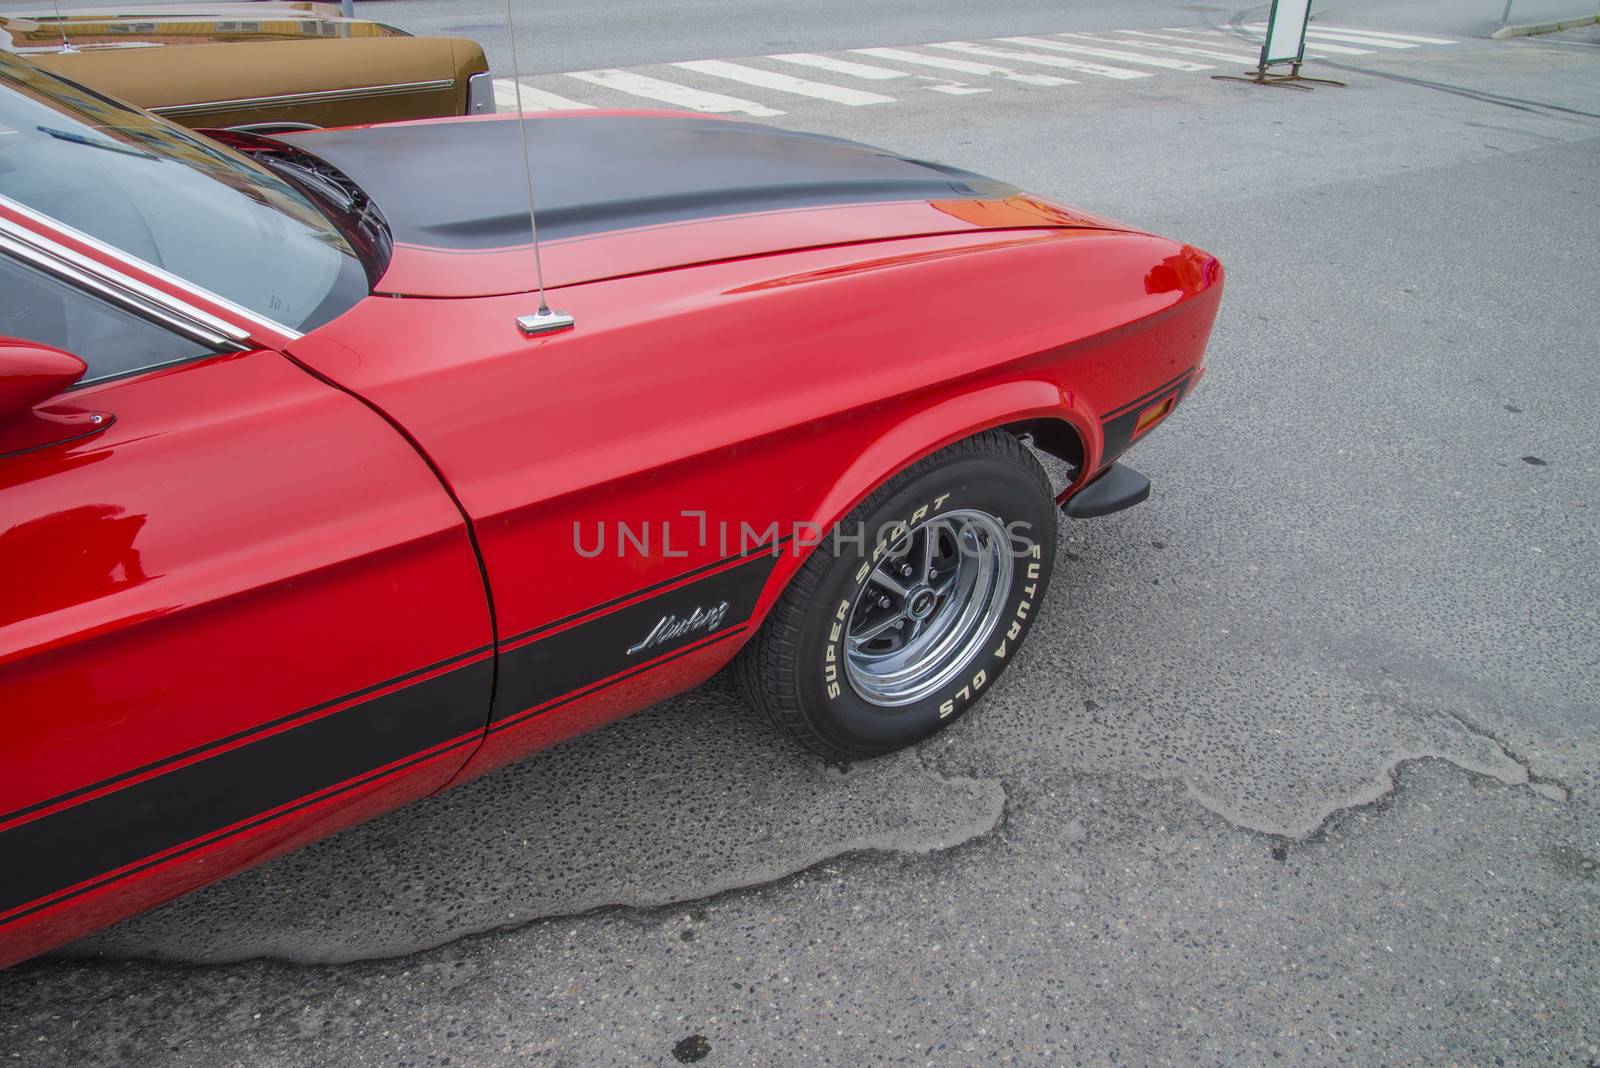 ford mustang mach 1, mod. 1974 by steirus